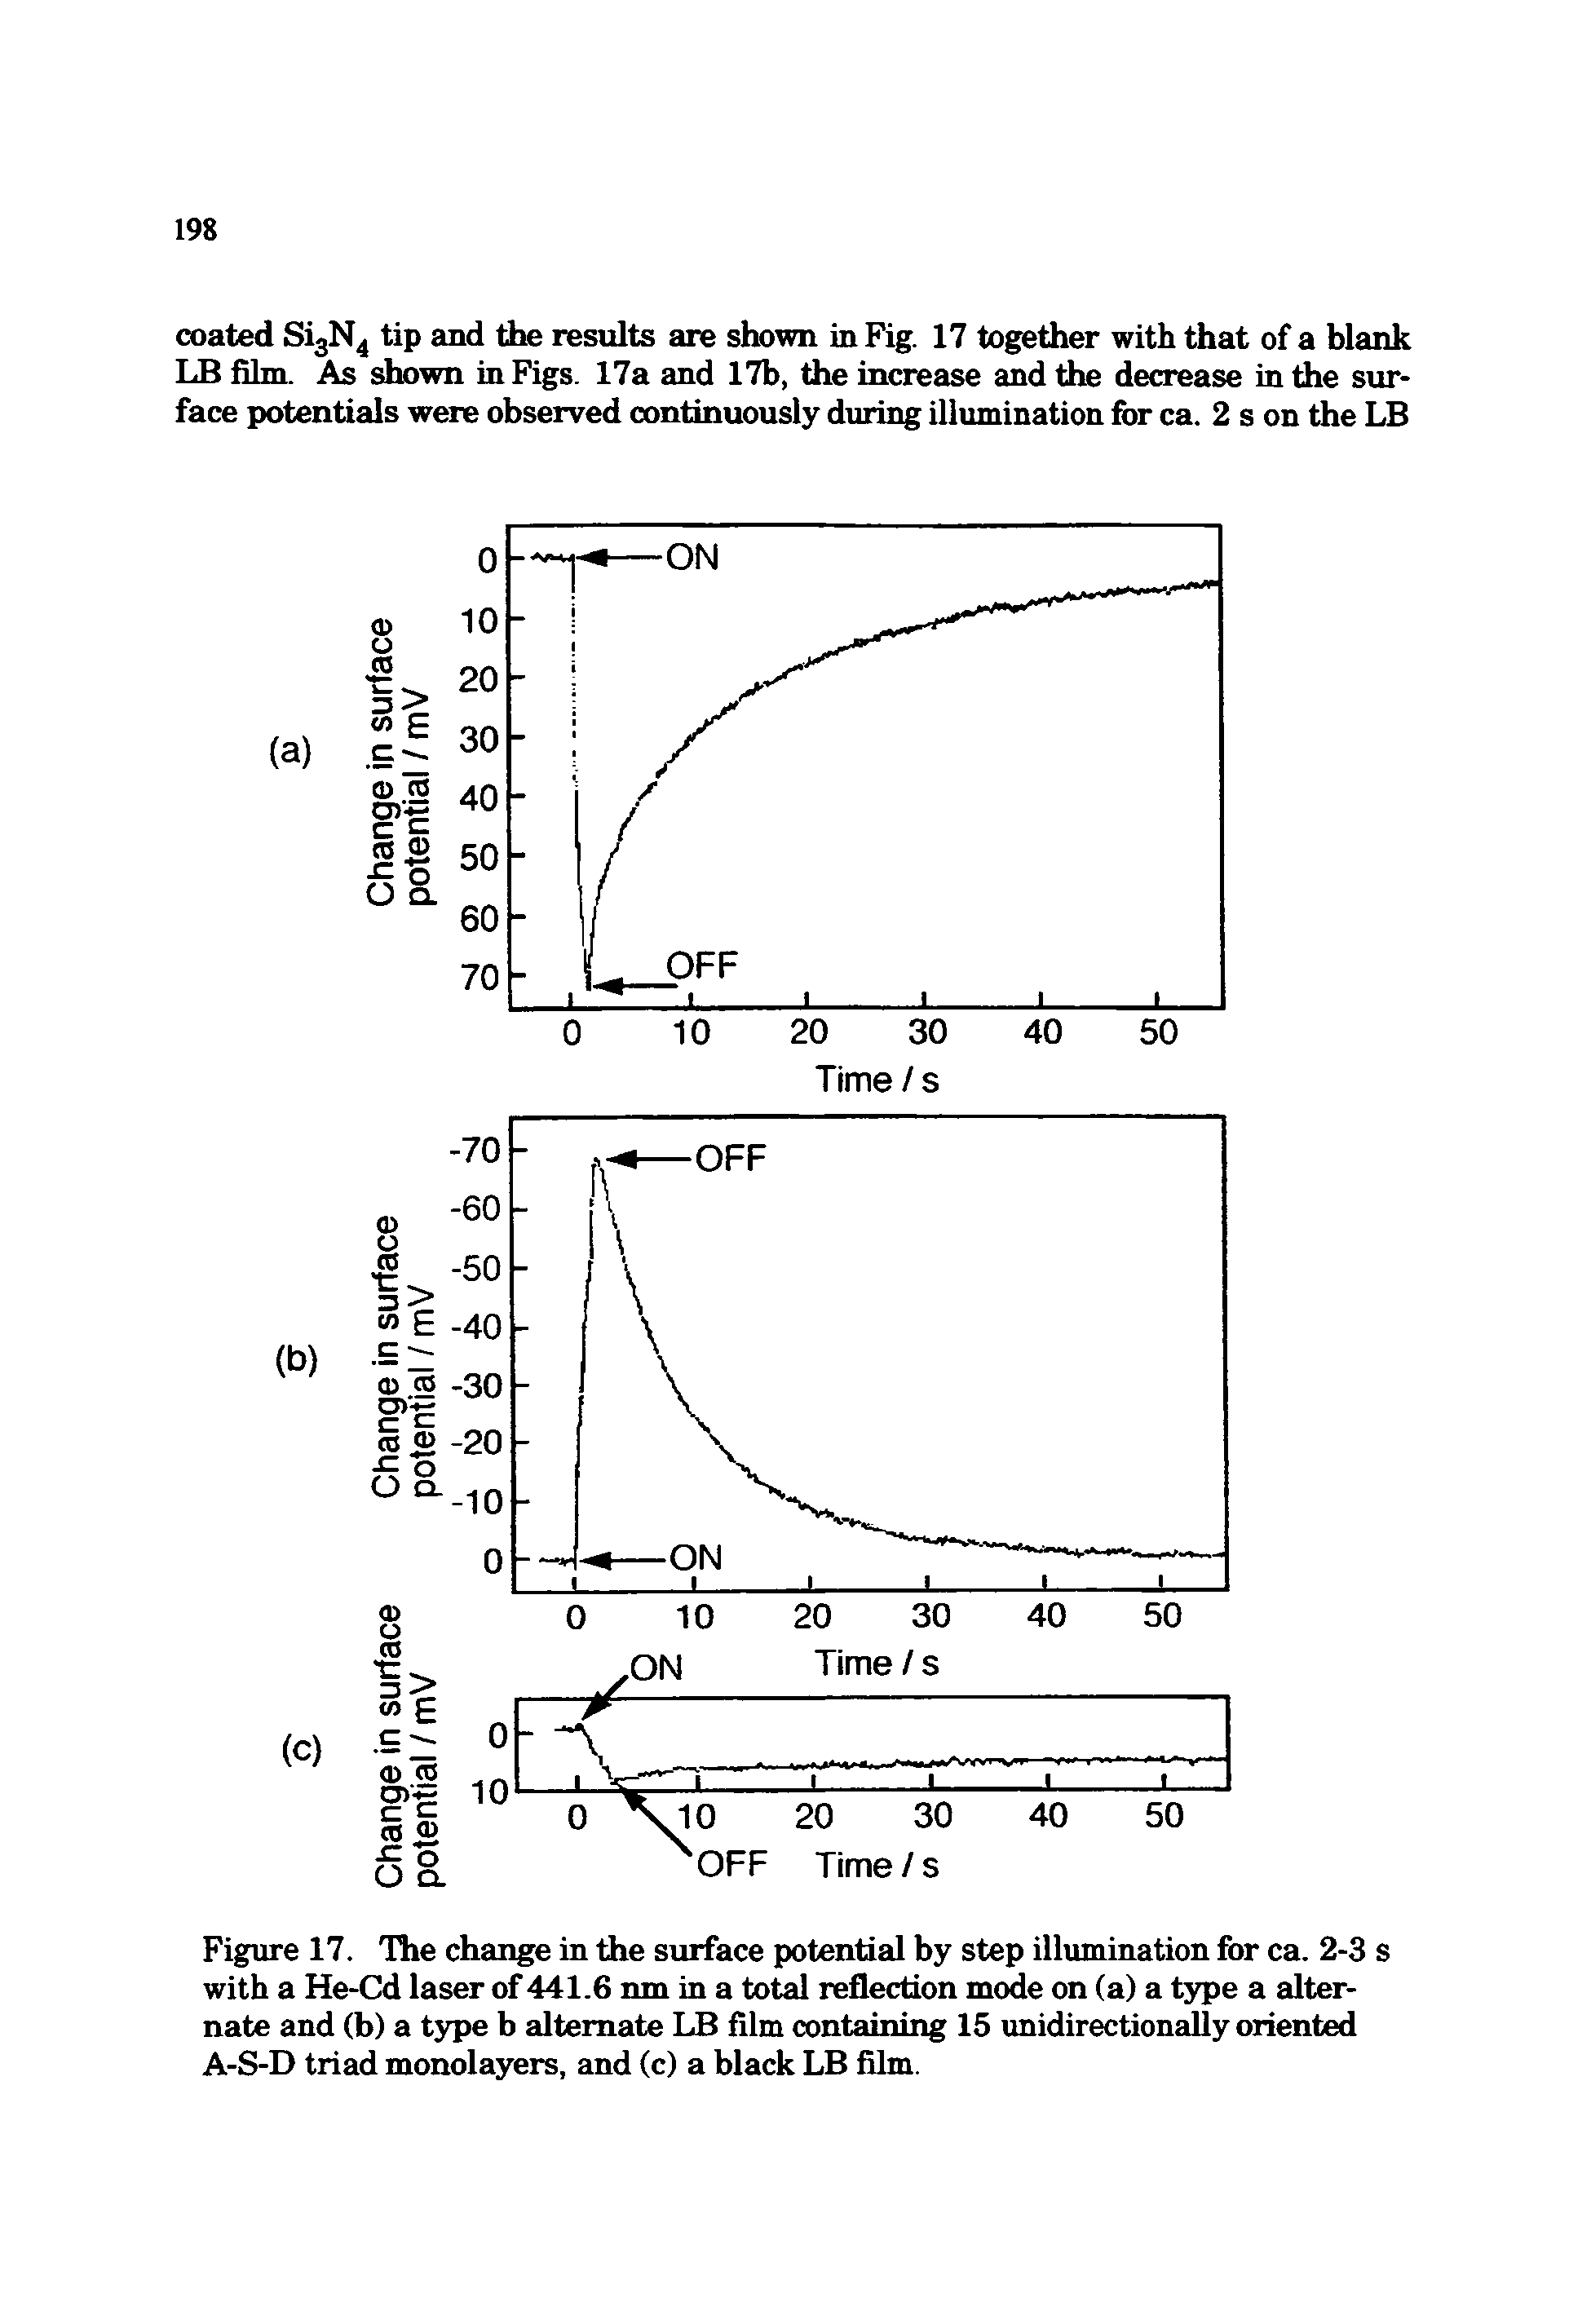 Figure 17. The change in the surface potential by step illumination for ca. 2-3 s with a He-Cd laser of 441.6 nm in a total reflection mode on (a) a type a alternate and (b) a type b alternate LB film containing 15 unidirectionally oriented A-S-D triad monolayers, and (c) a black LB film.